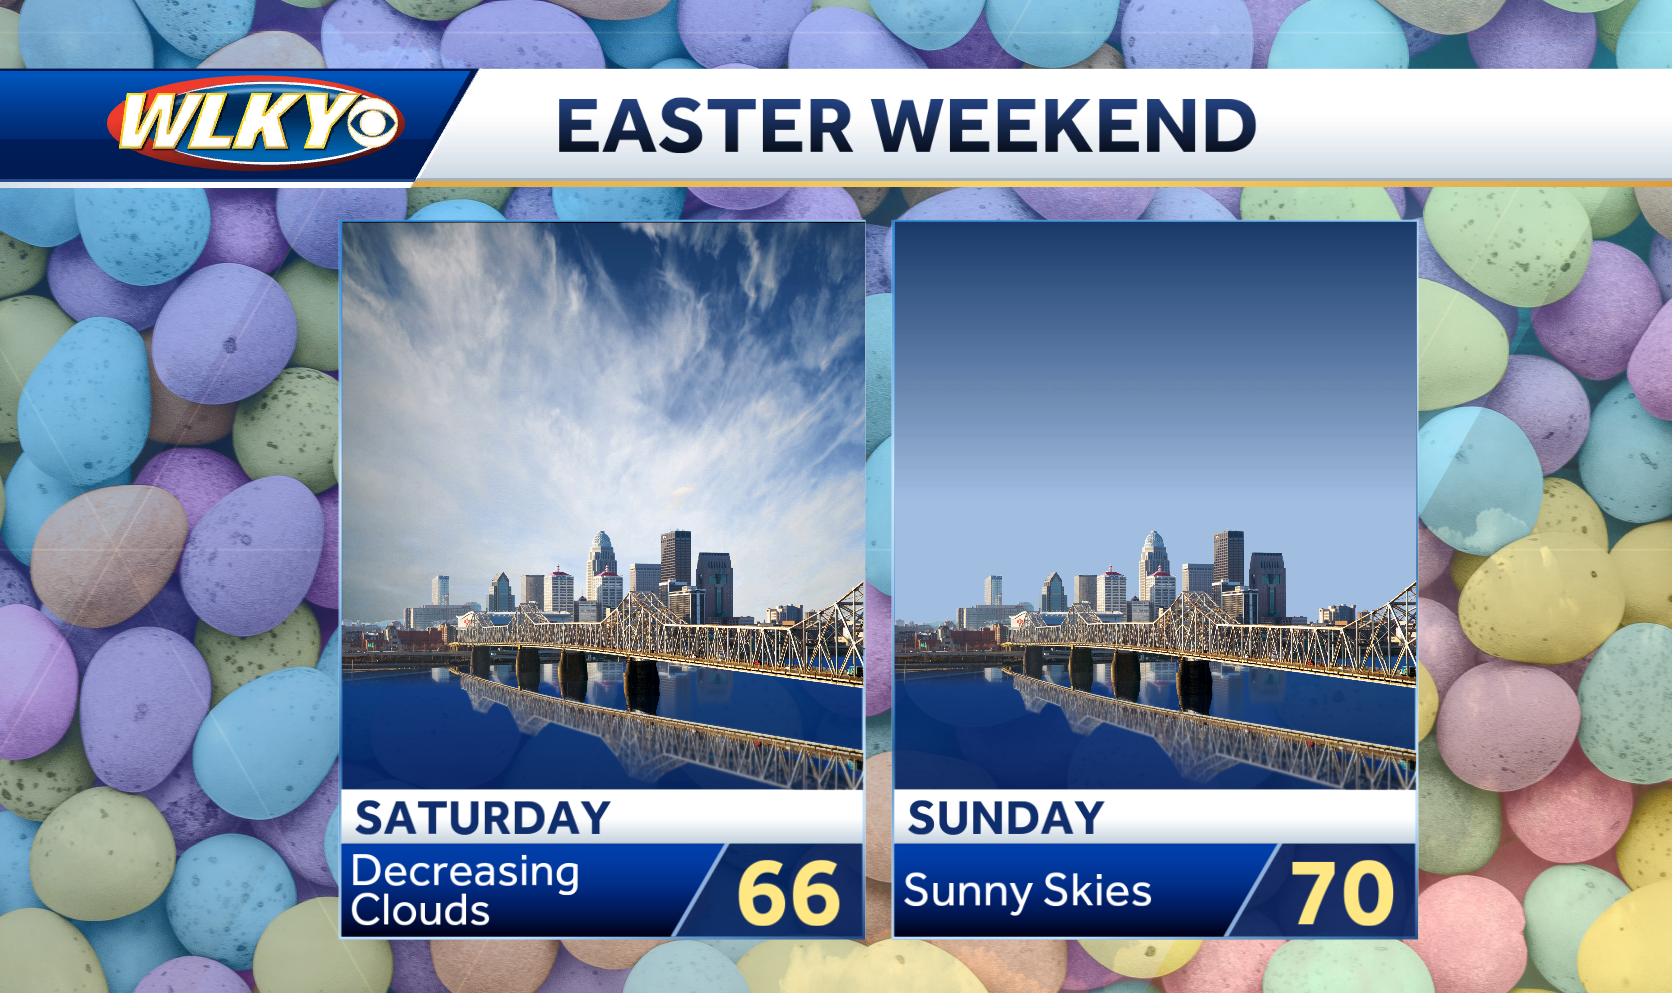 Weekend weather planner: Warmer, peaceful weather for Easter